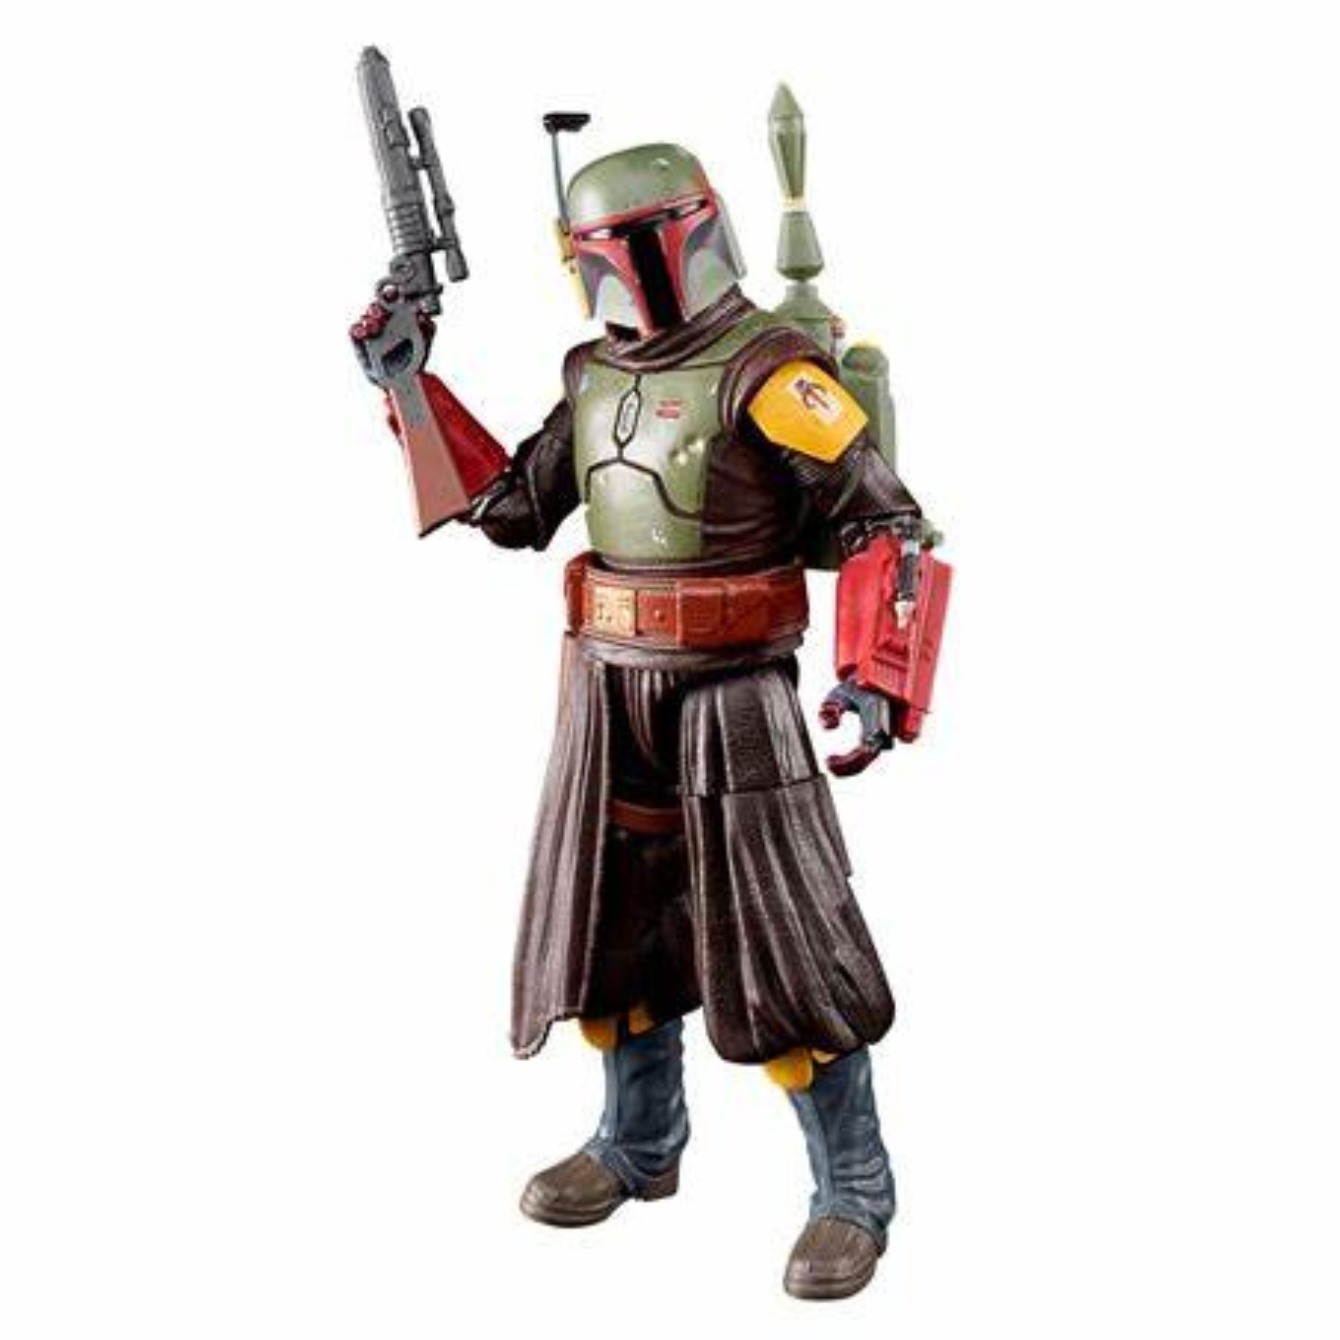 Star Wars The Black Series Boba Fett (Throne Room) Deluxe Action Figure